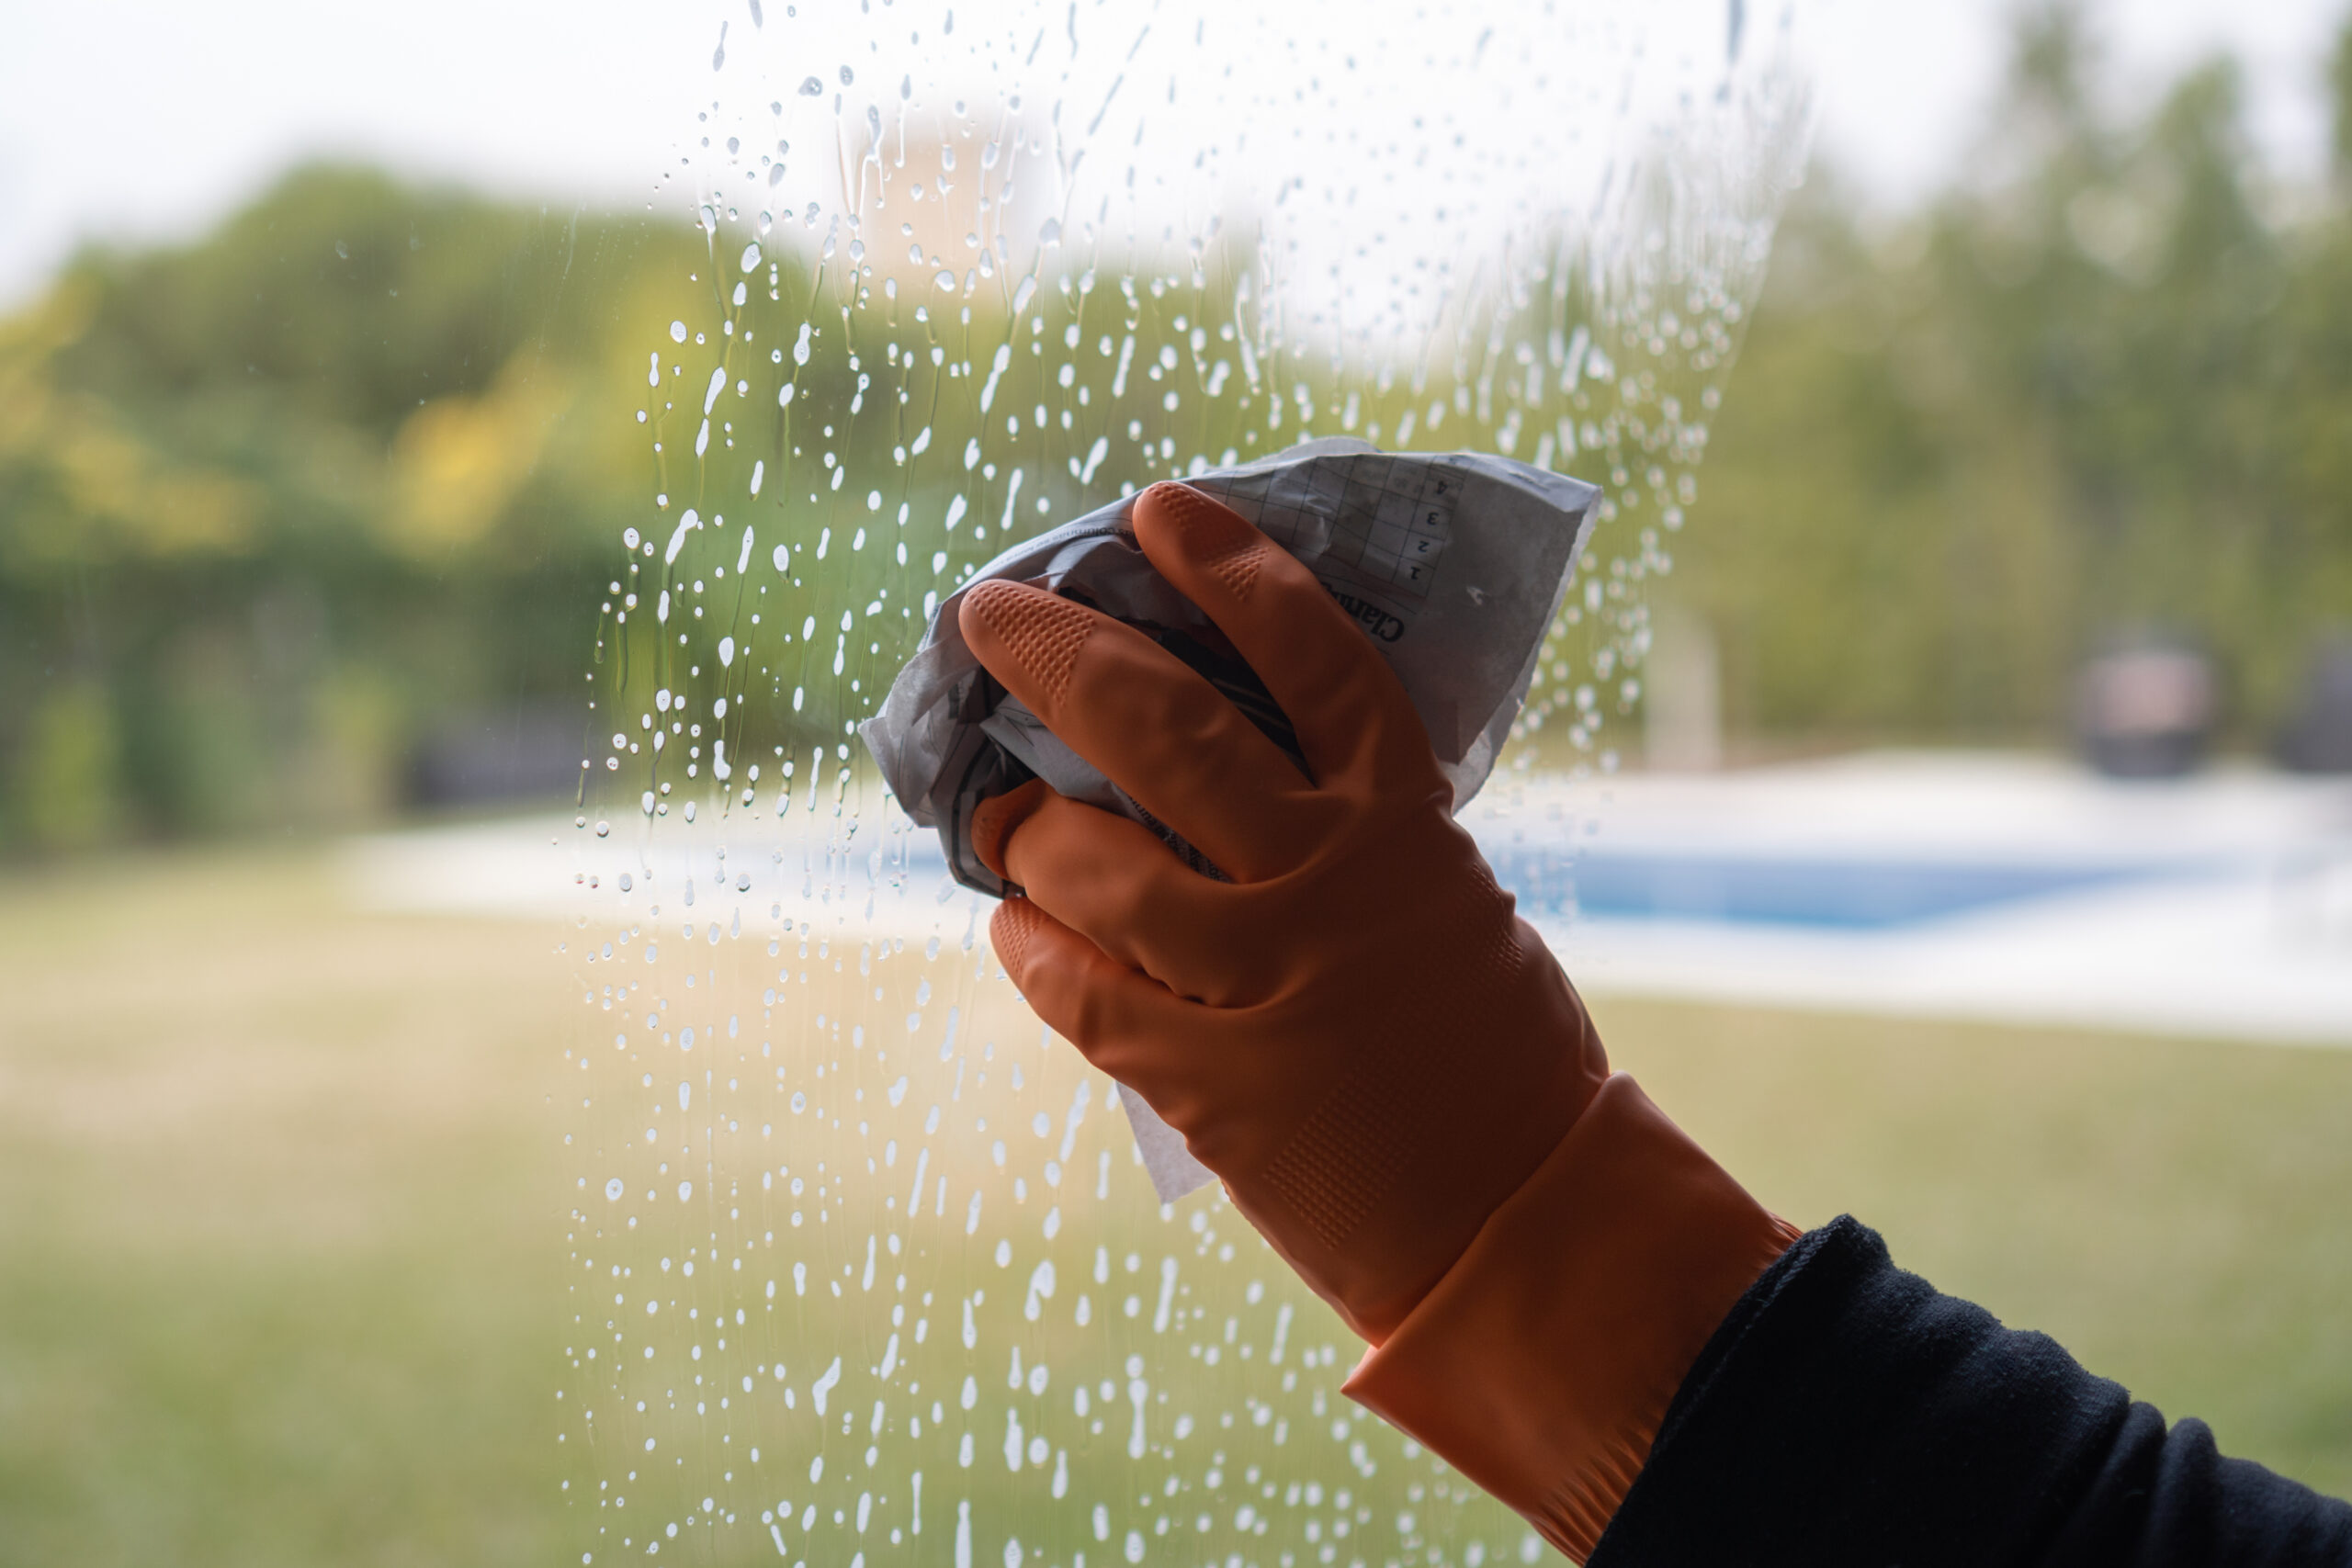 Exterior Window Cleaning Tools - S&K Services